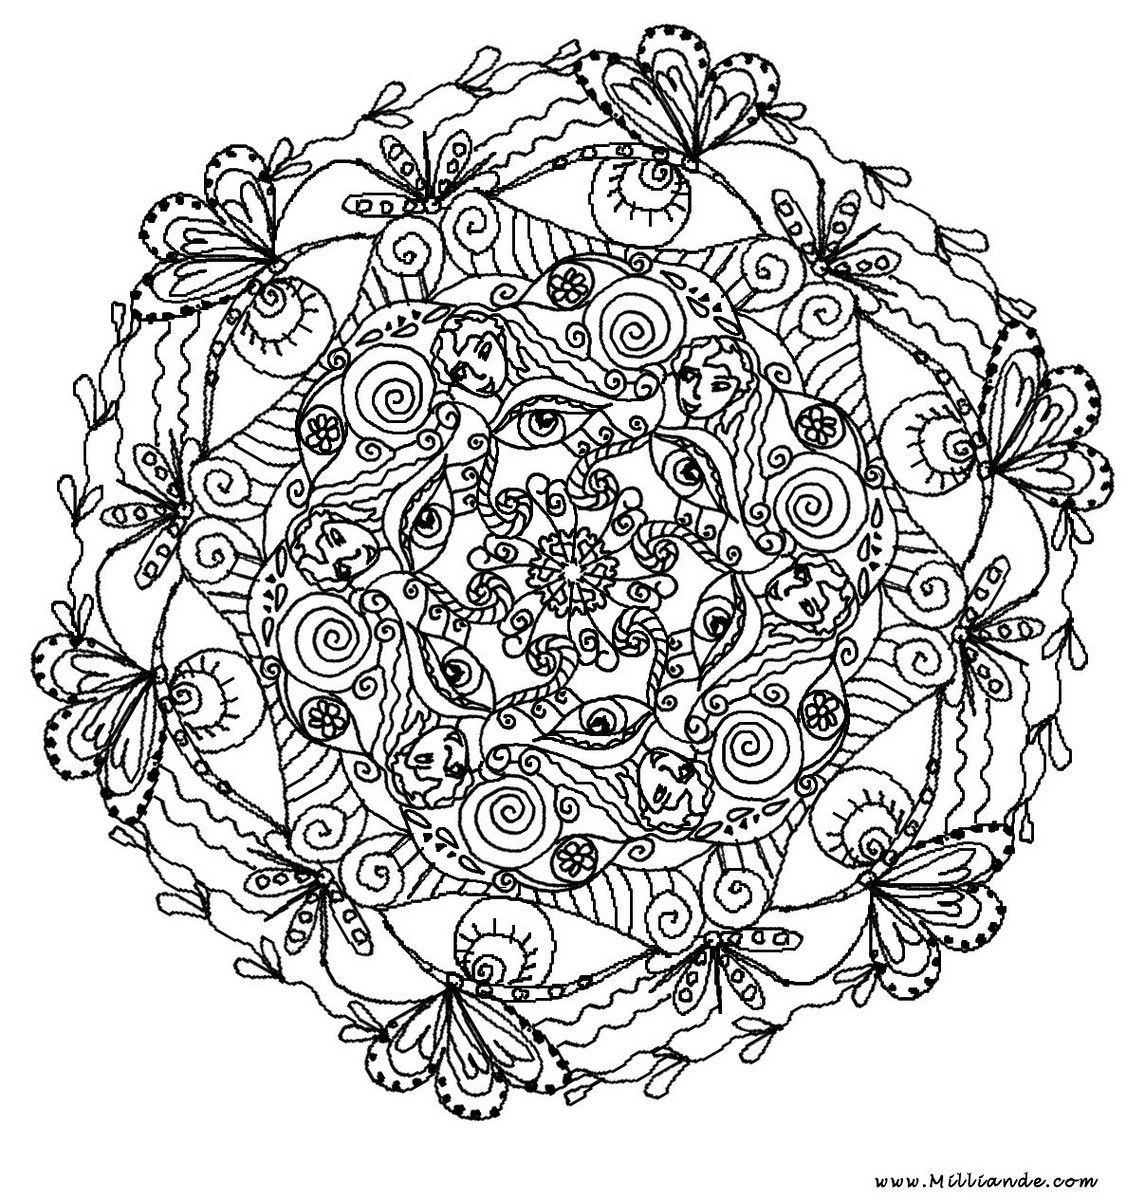 center-yourself-with-mandalas